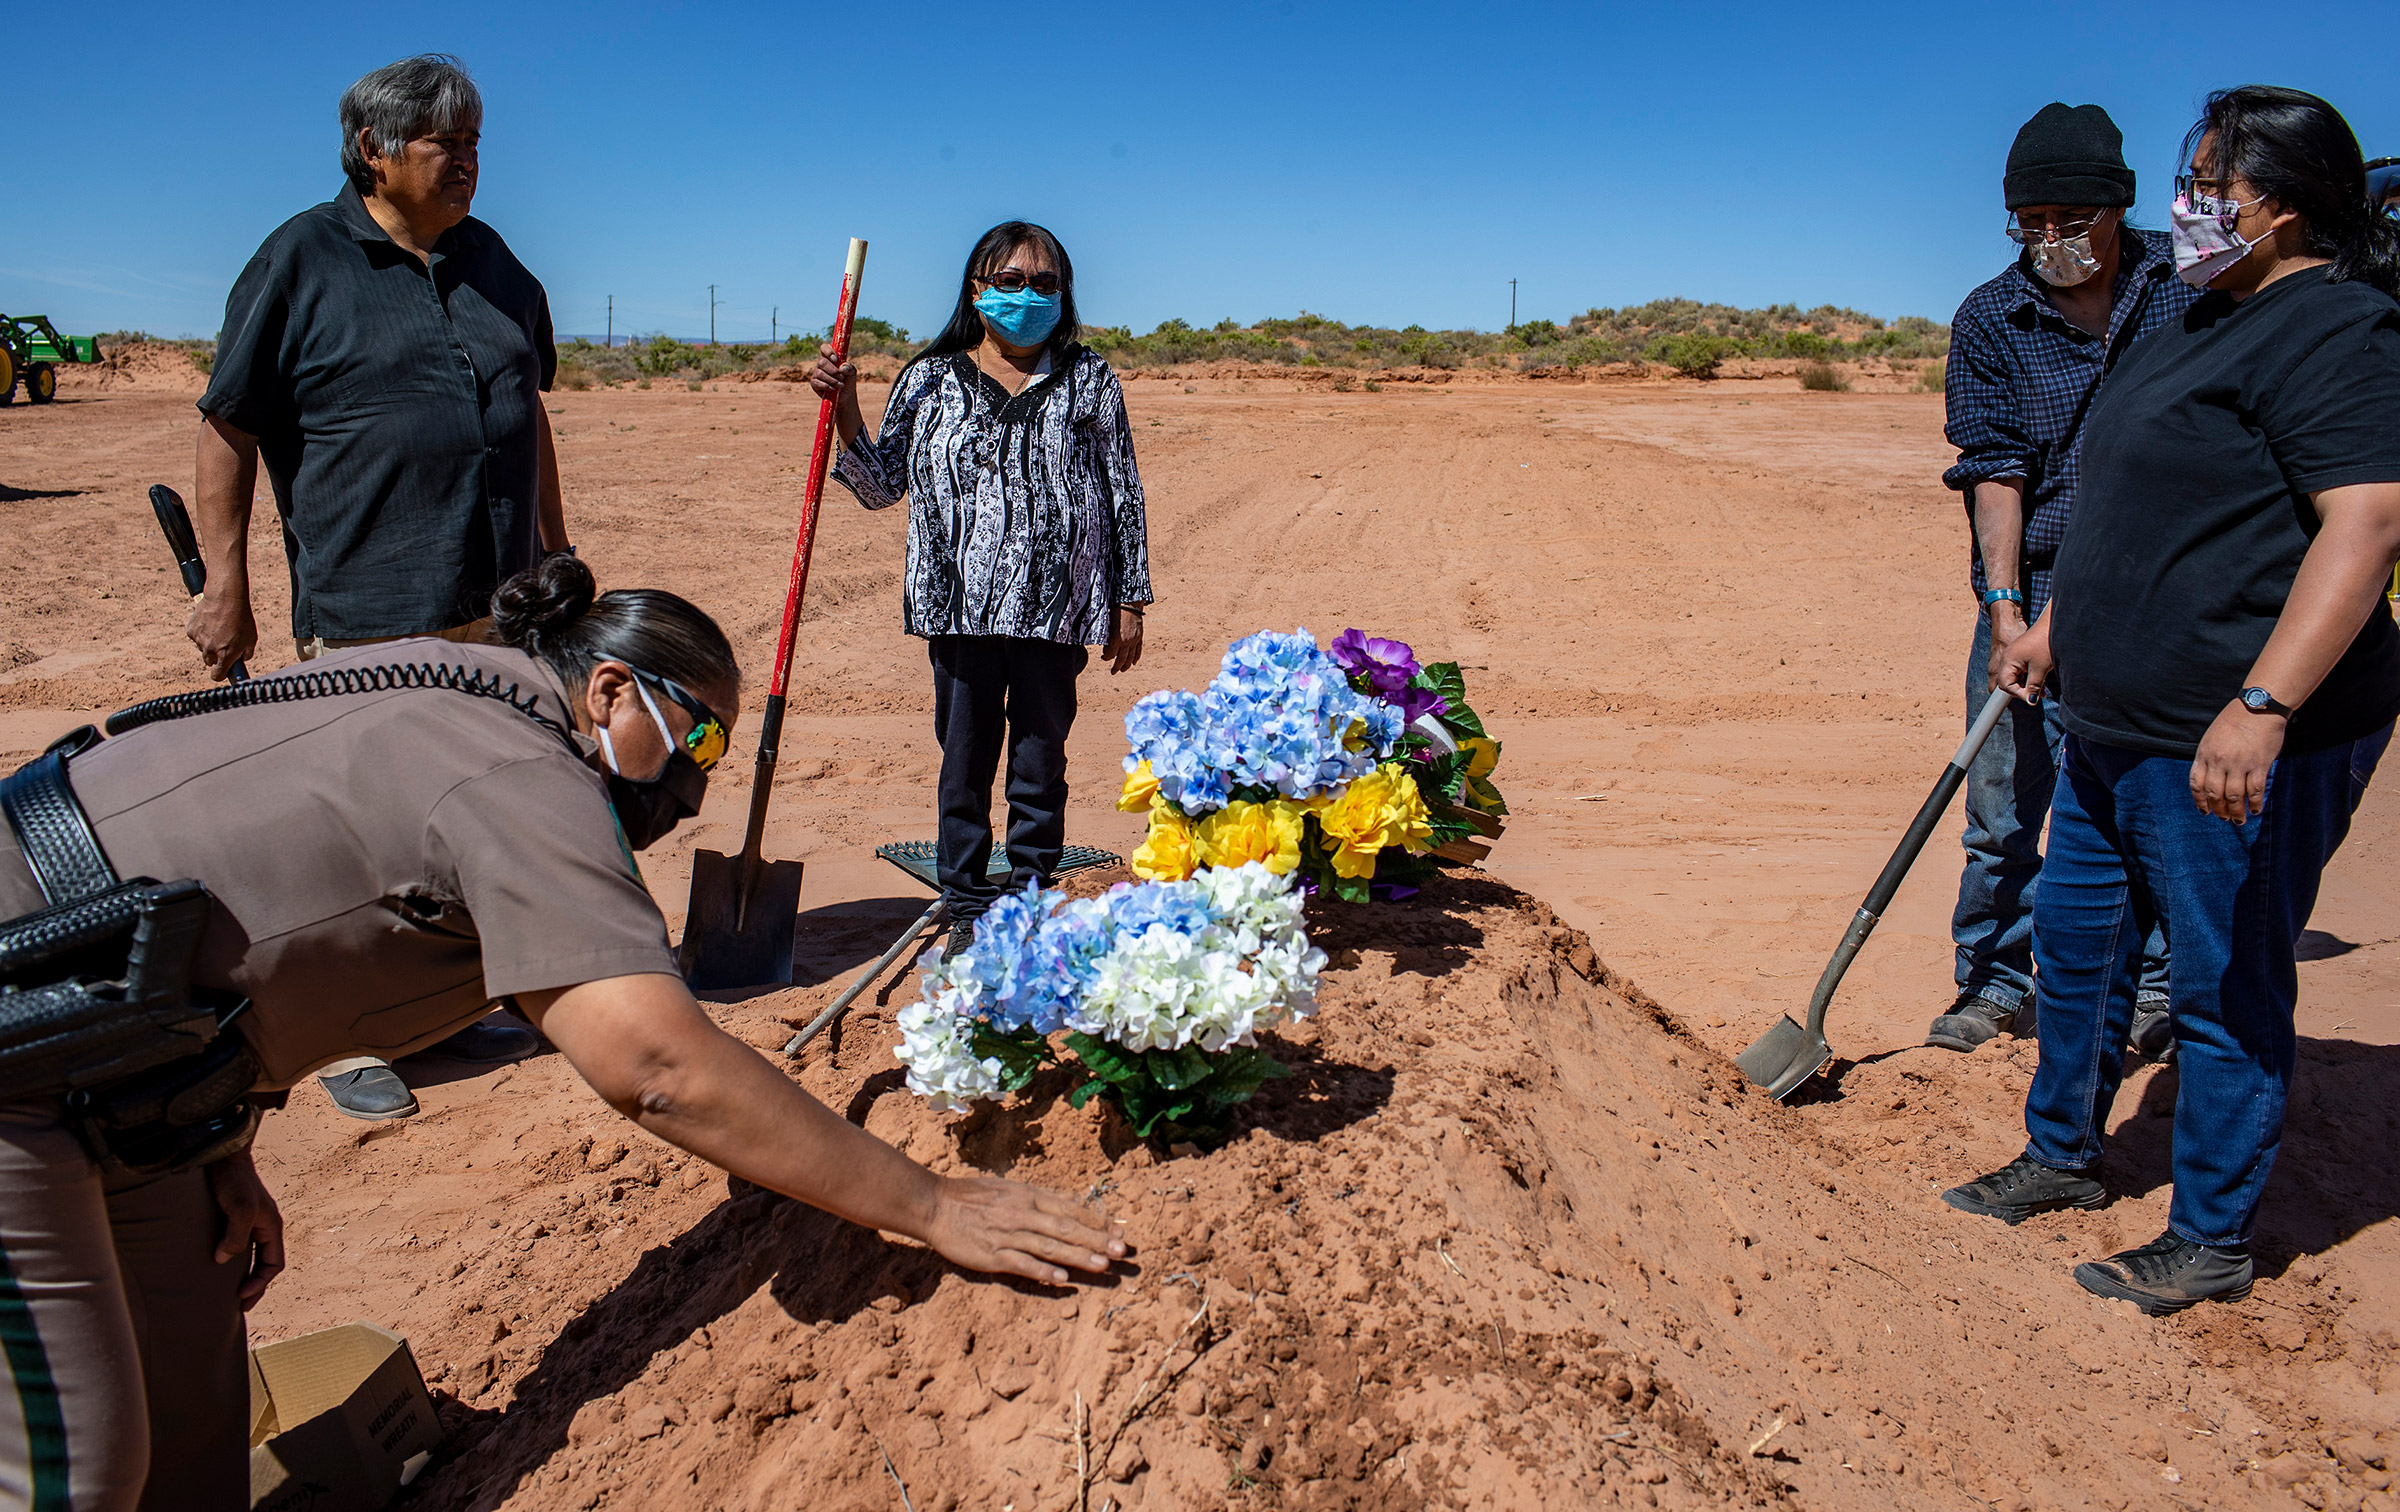 A funeral is held for Arnold Billy, who was a victim of COVID-19, at Tuba City Community Cemetery in Tuba City, Ariz., on May 22, 2020. (Brian van der Brug—Los Angeles Times/Getty Images)